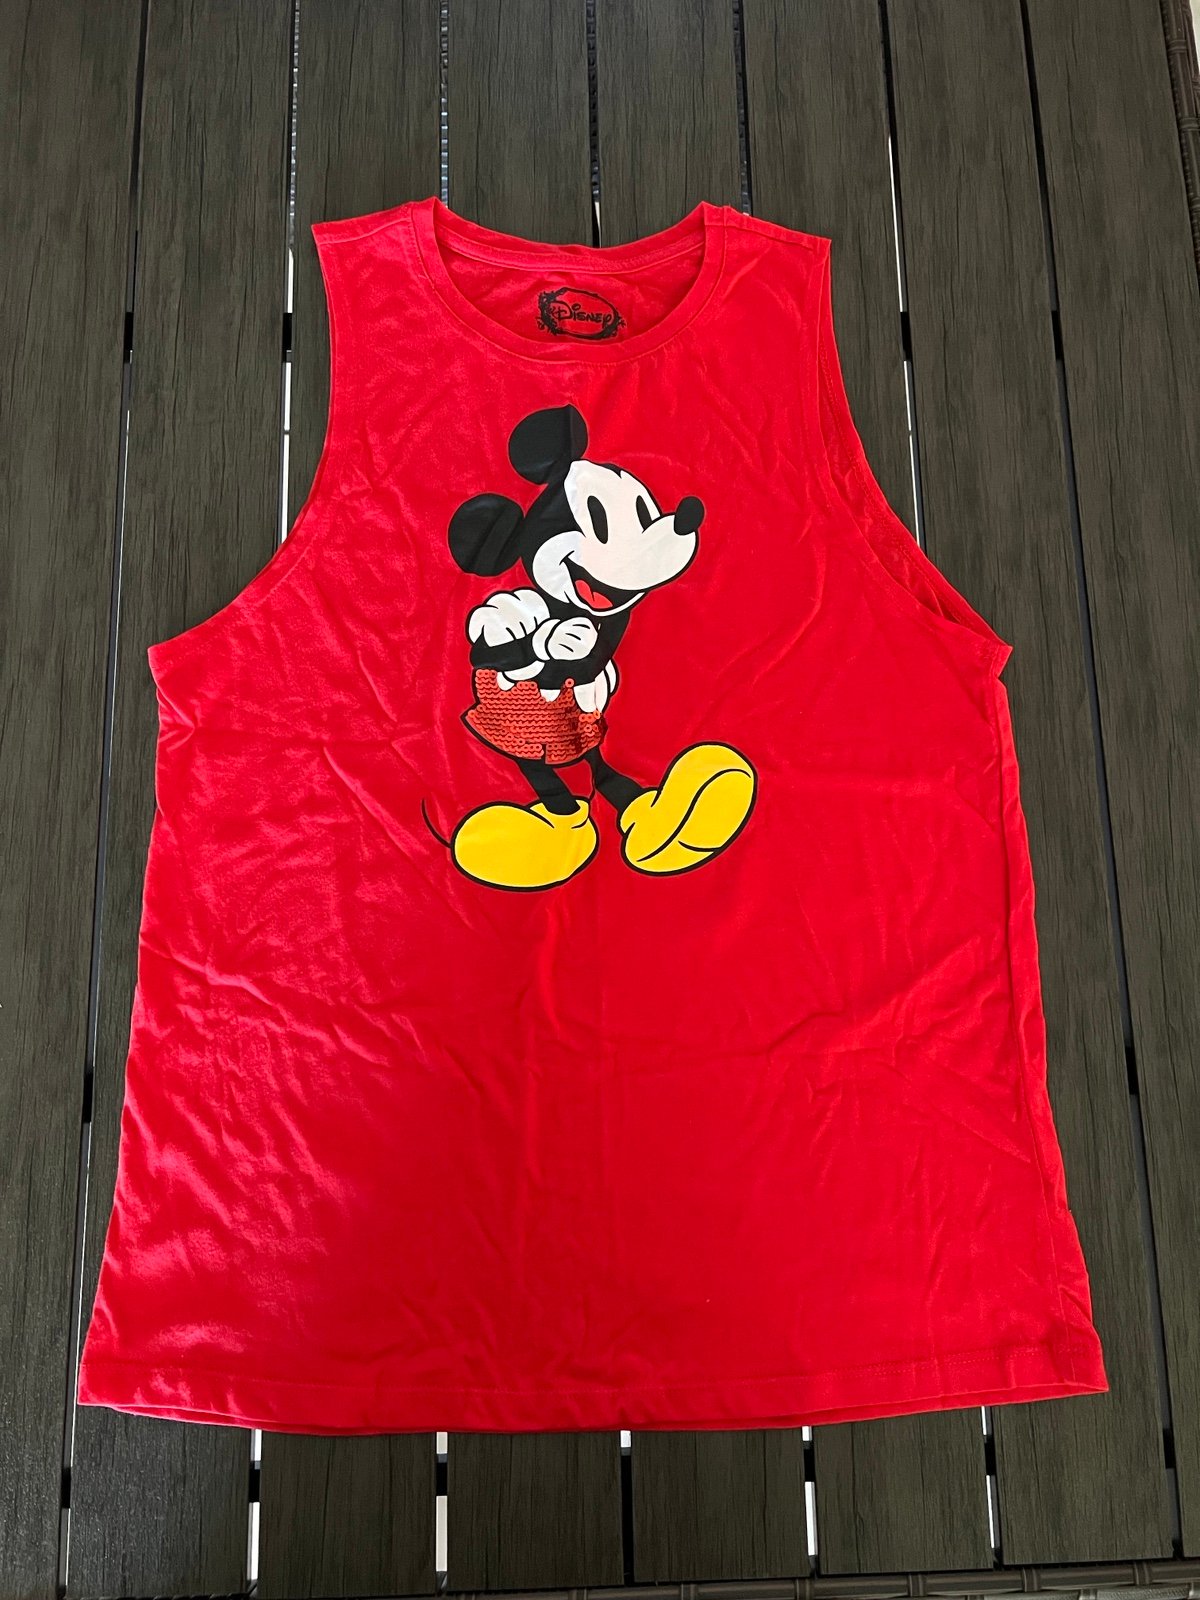 Affordable Disney Mickey Mouse Tank Top lwzfrMFTX just for you